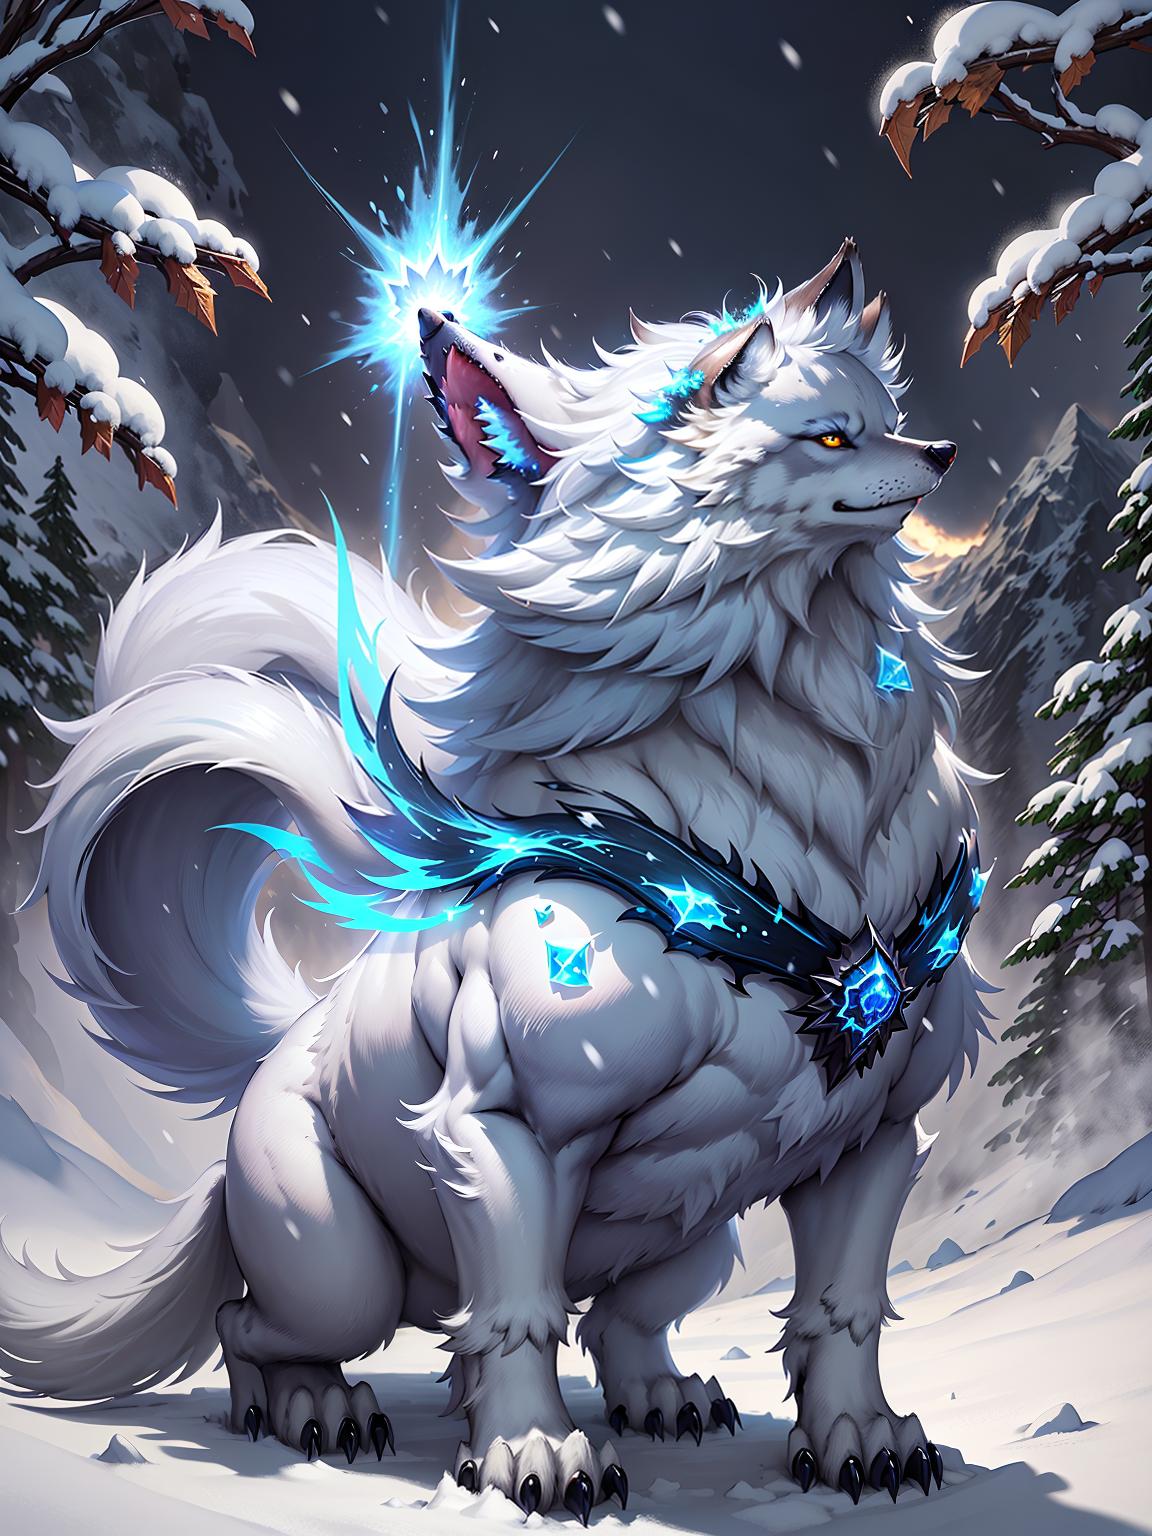  master piece, best quality, ultra detailed, highres, 4k.8k, White wolf., Using its powers to summon a blizzard., Proud and powerful., BREAK The majestic white wolf residing in the snowy mountain, wielding the power of winter to conjure blizzards., Snow covered mountain peak., Snow capped trees, icy cliffs, swirling snowflakes, ancient ruins., BREAK Majestic and serene., Glowing blue aura, swirling snowflakes around the wolf, ethereal mist., fun00d